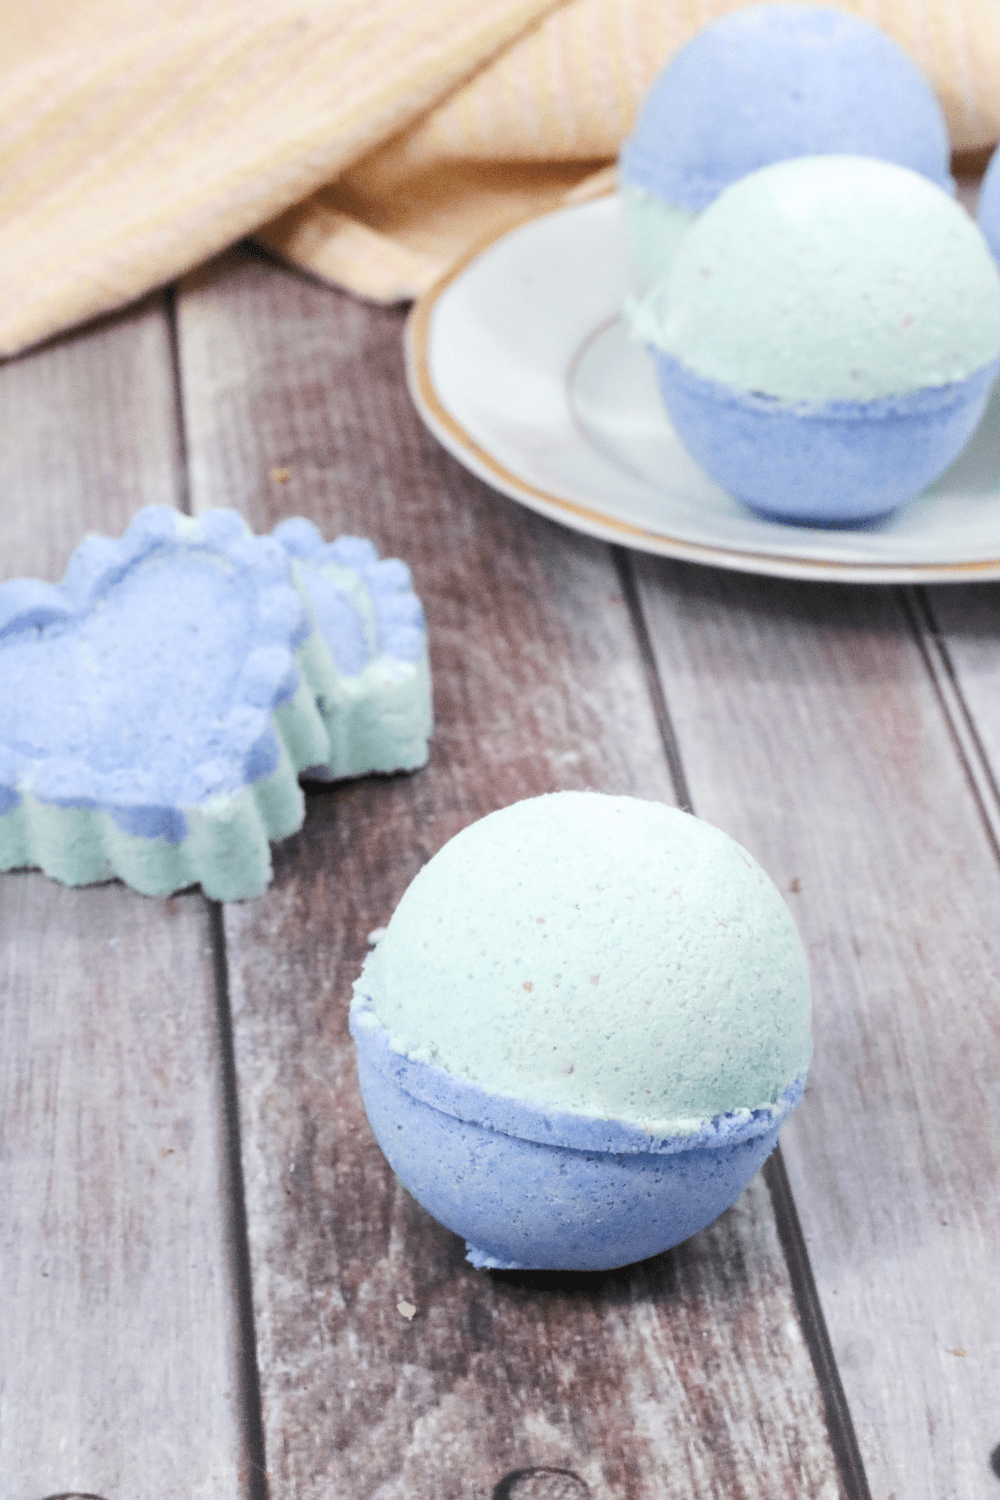 Blue and green bath bomb with heart shaped bath bombs and more bath bombs on a white plate behind it